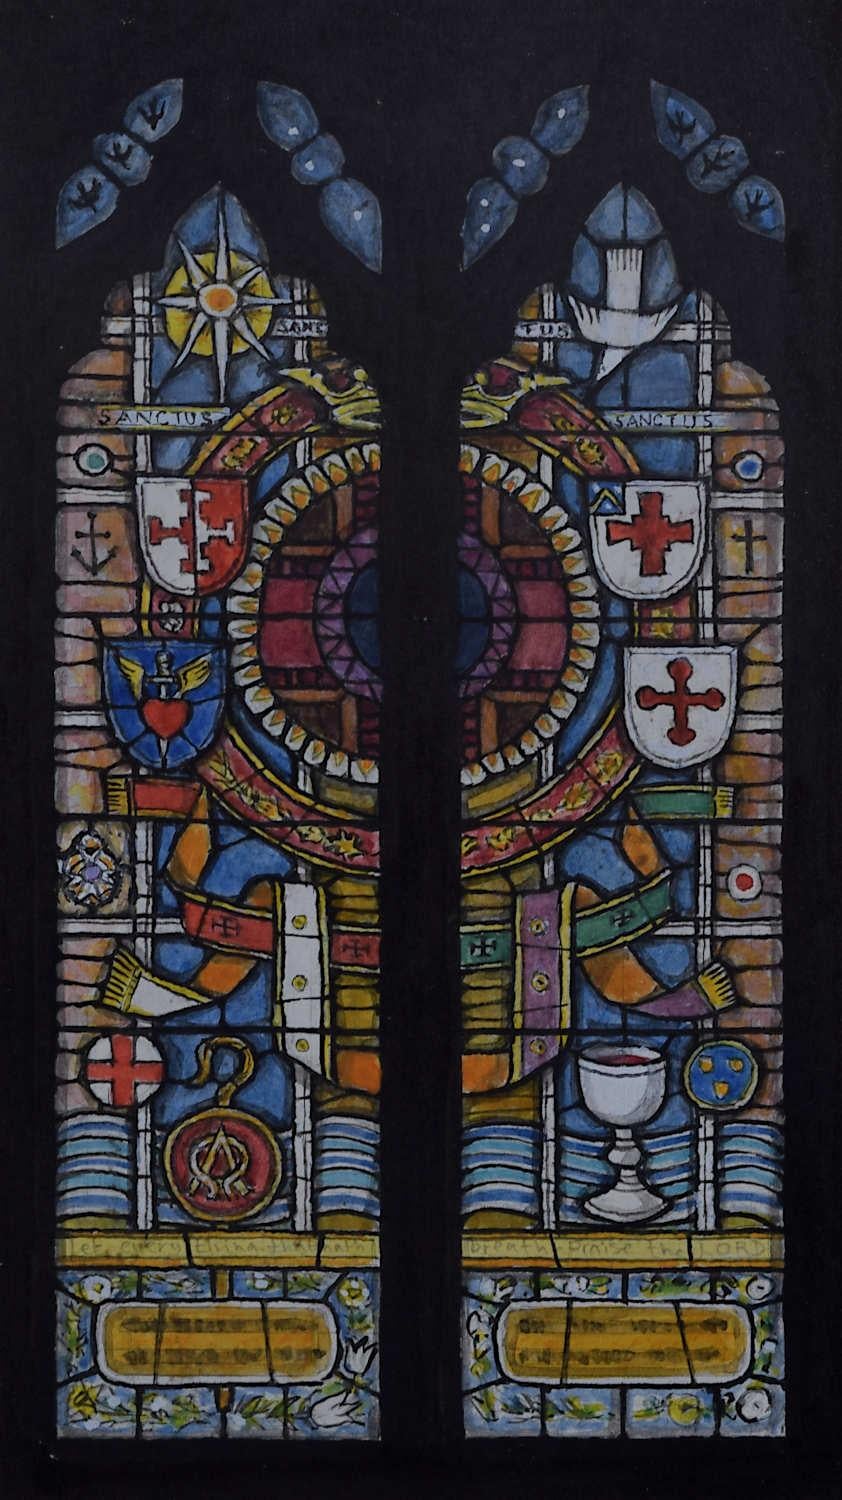 We acquired a series of watercolour stained glass designs from Jane Gray's studio. To find more scroll down to "More from this Seller" and below it click on "See all from this seller." 

Jane Gray (b.1931)
Stained Glass Design
Watercolour
18.5 x